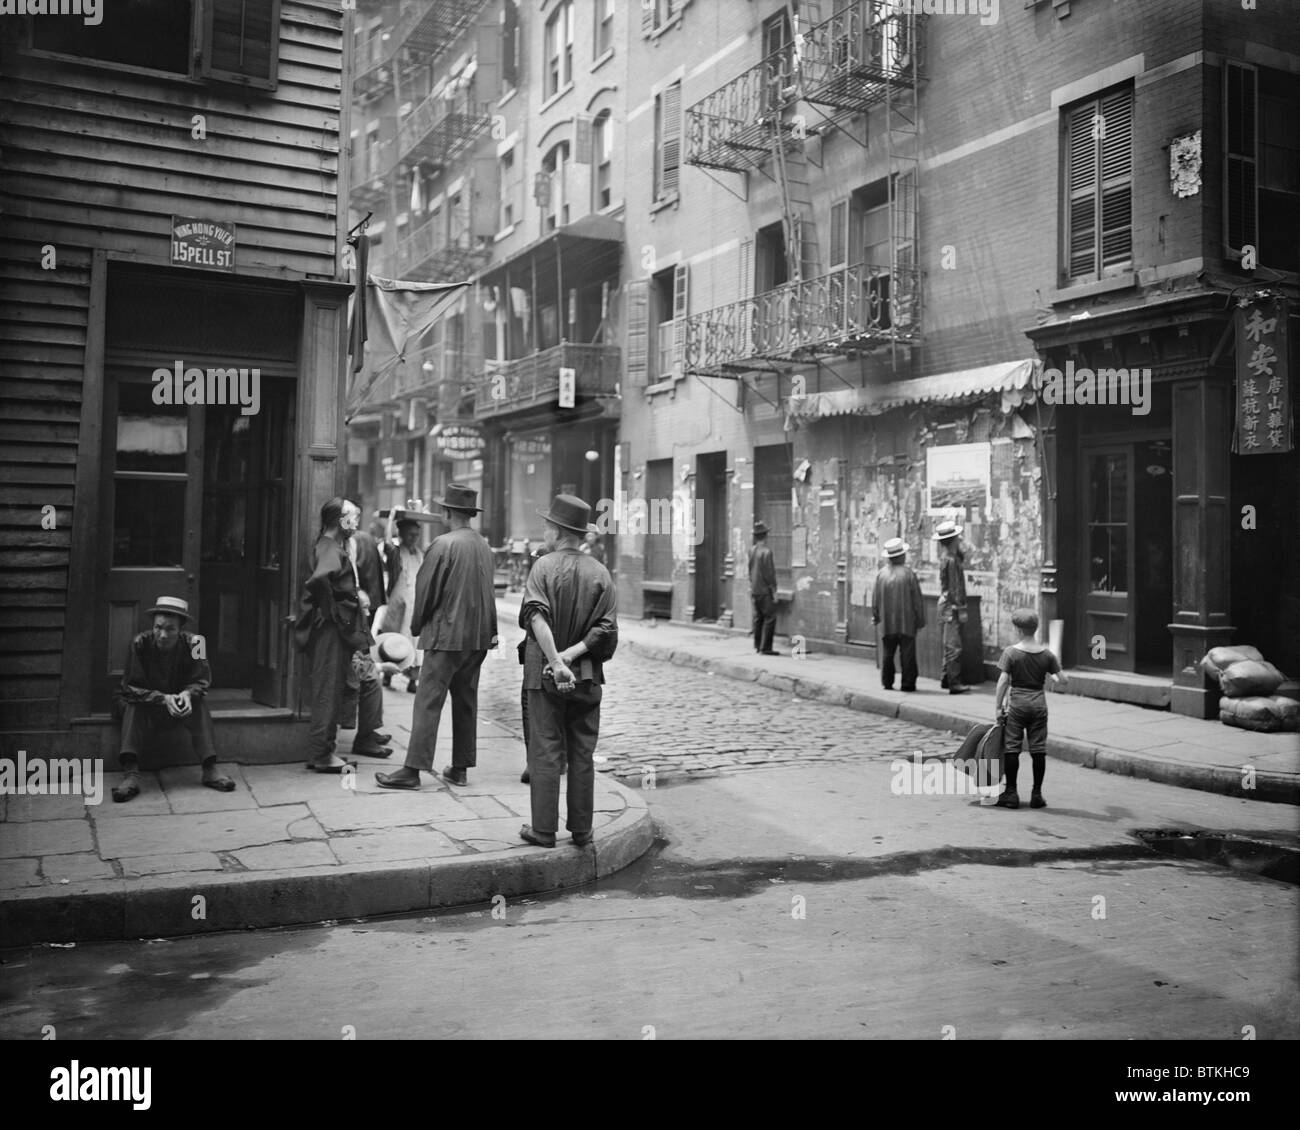 Pell Street in New York City's Chinatown with several Chinese men in traditional dress, one with his hair in the Han Chinese queue, a waist-long, braided pigtail. Ca. 1900. Stock Photo